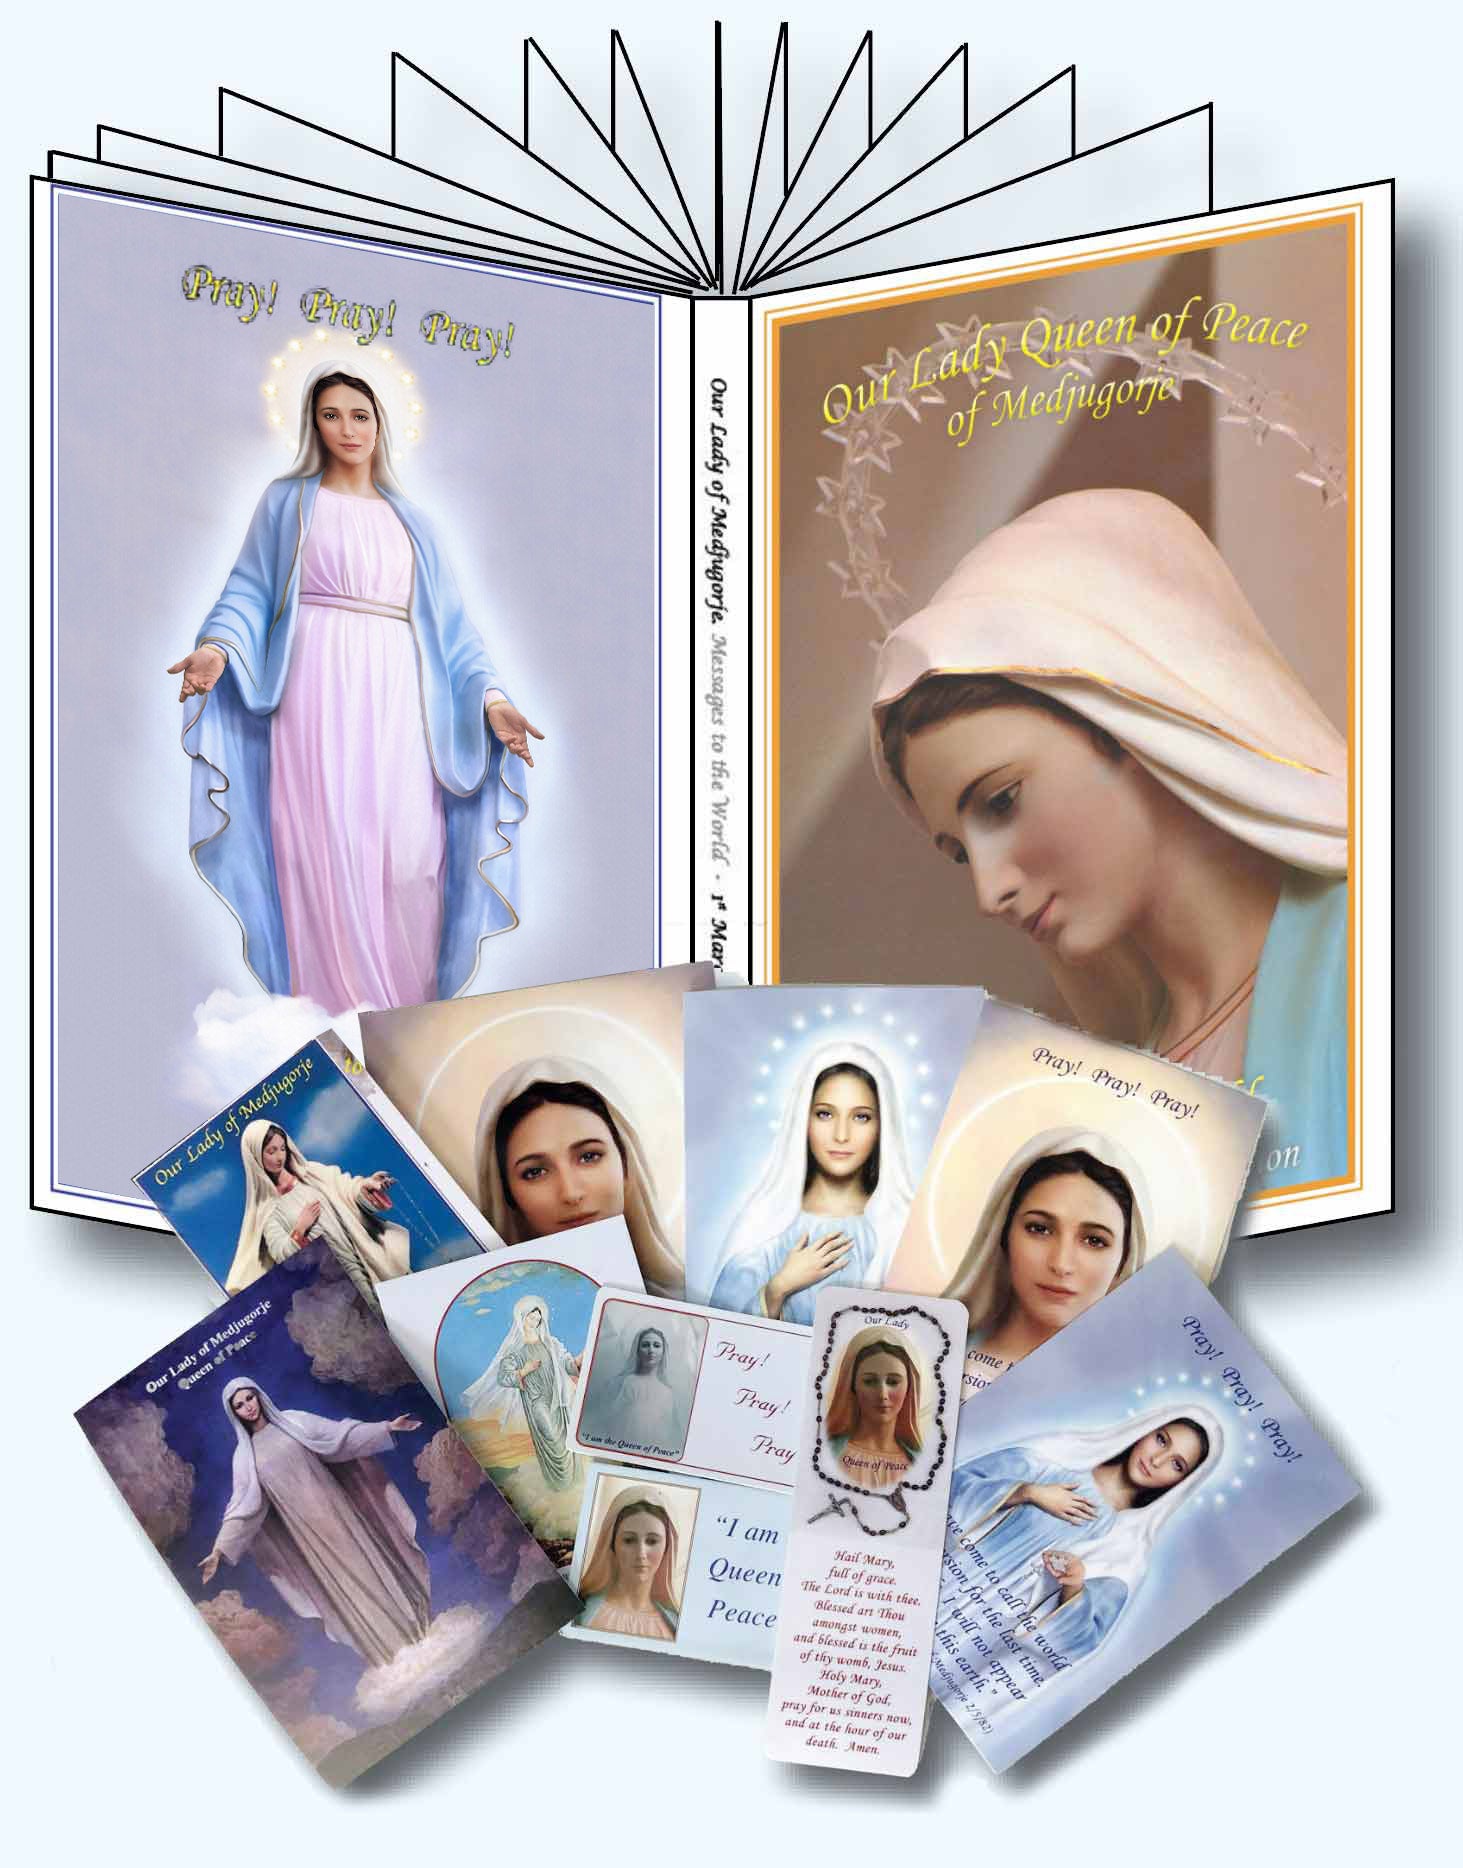 Our Lady Queen of Peace of Medjugorje, Messages to the World